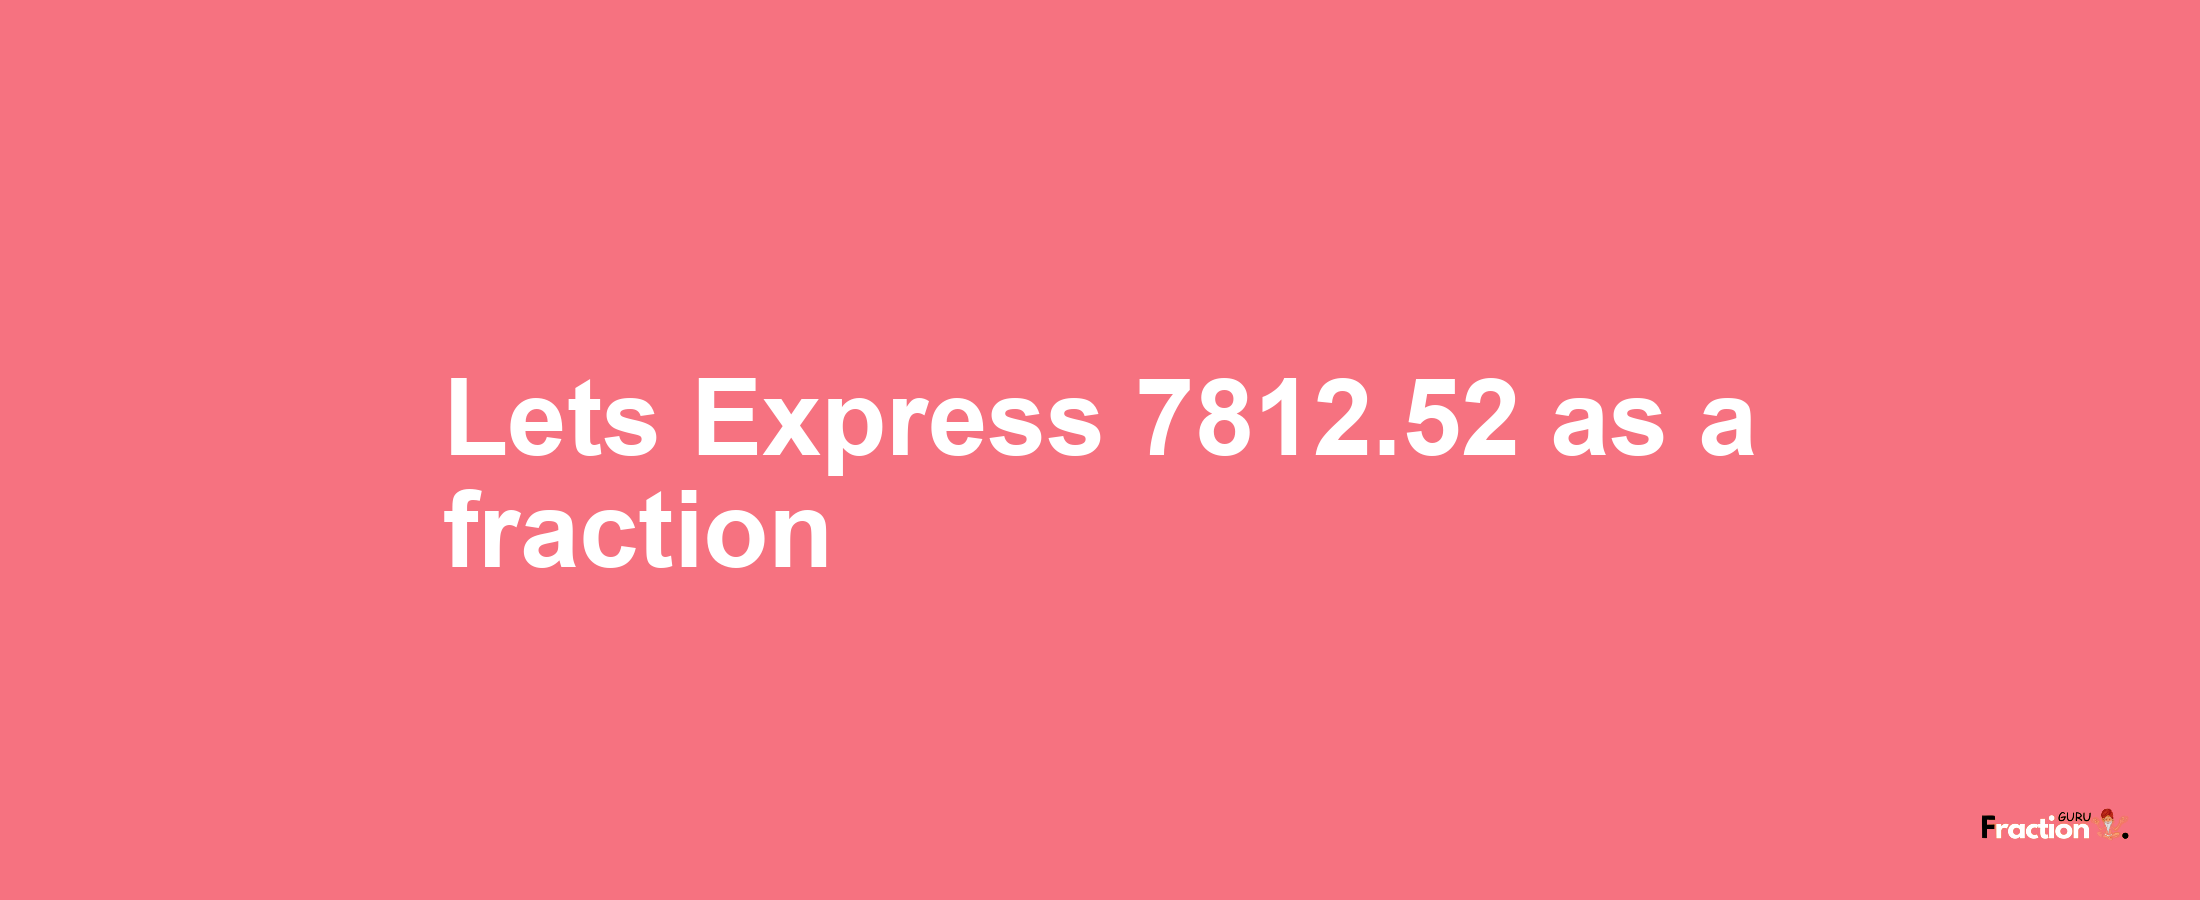 Lets Express 7812.52 as afraction